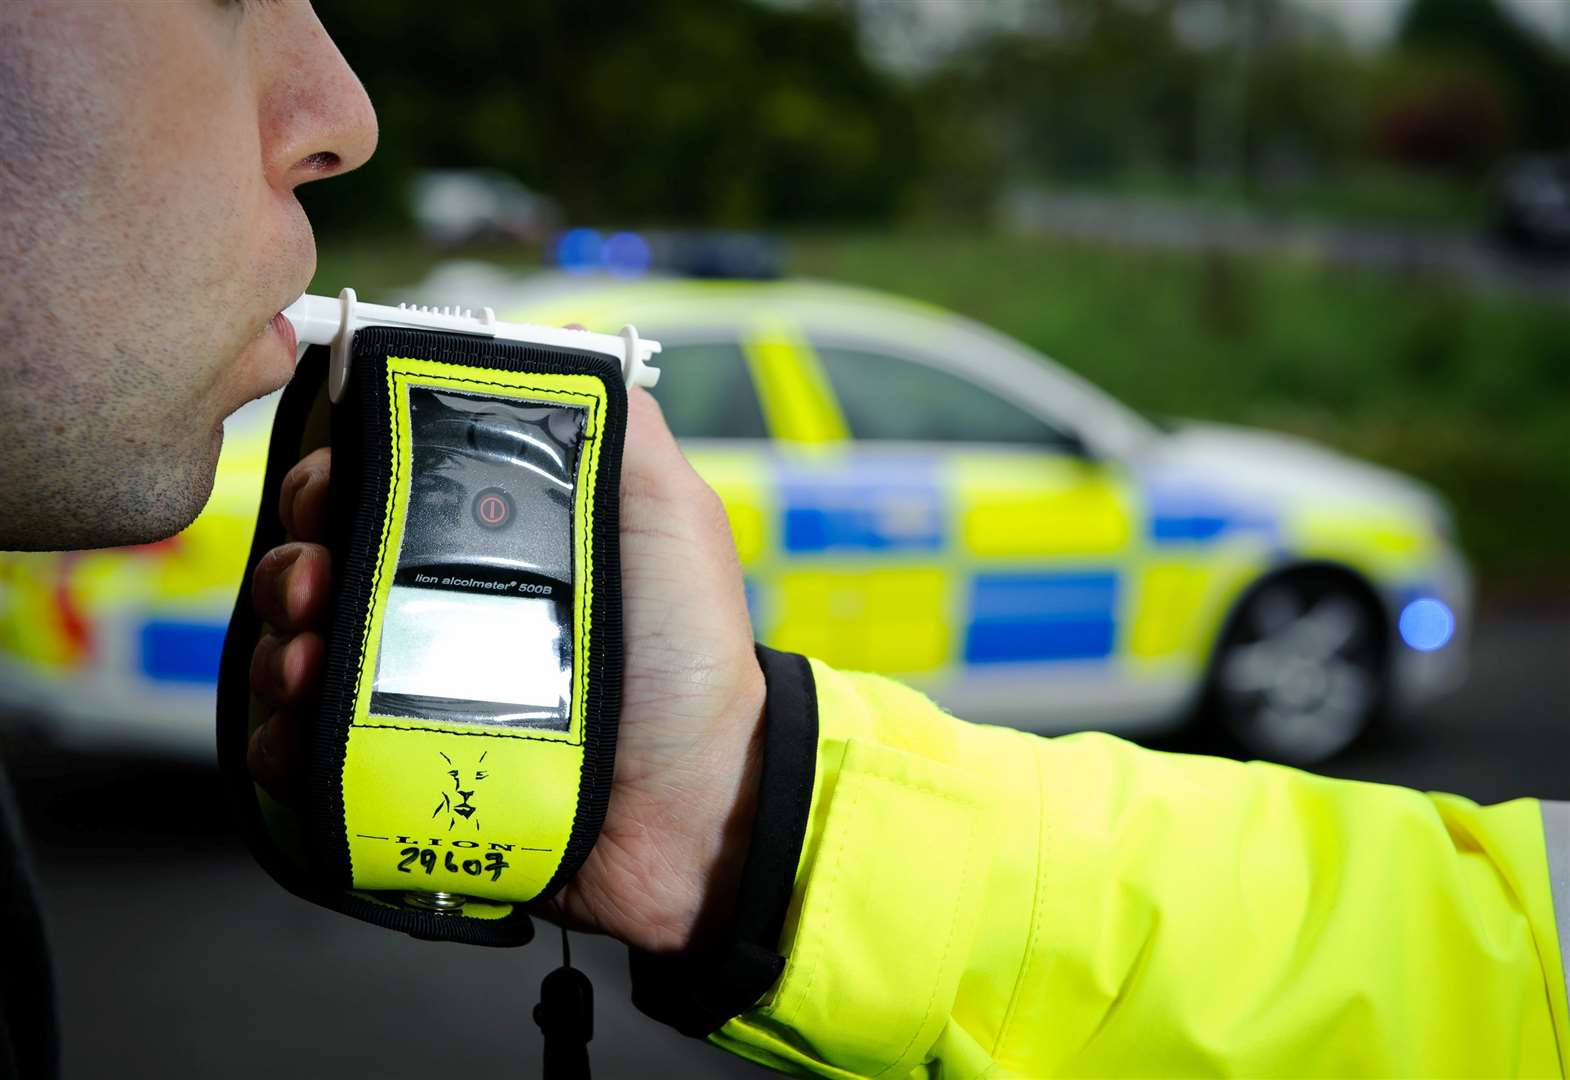 Drink-driving carries a minimum ban of 12 months